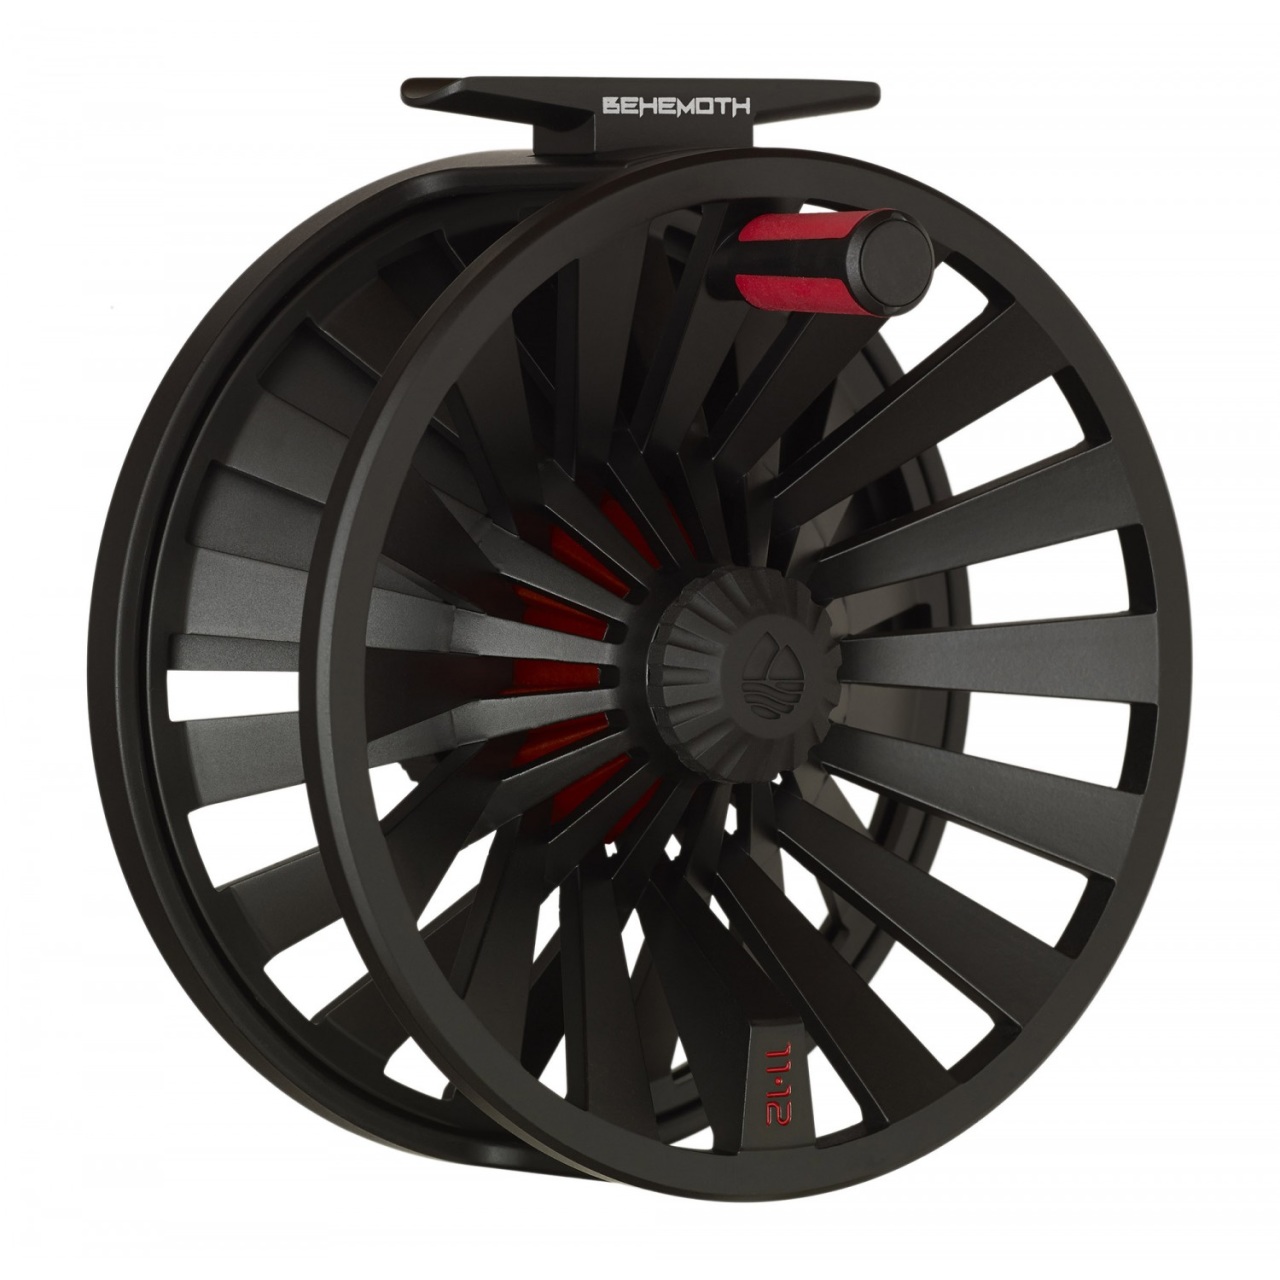 Lightweight Design Large Arbor and Oversized Drag Knob Redington Rise Fly Fishing Reel Freshwater and Saltwater 